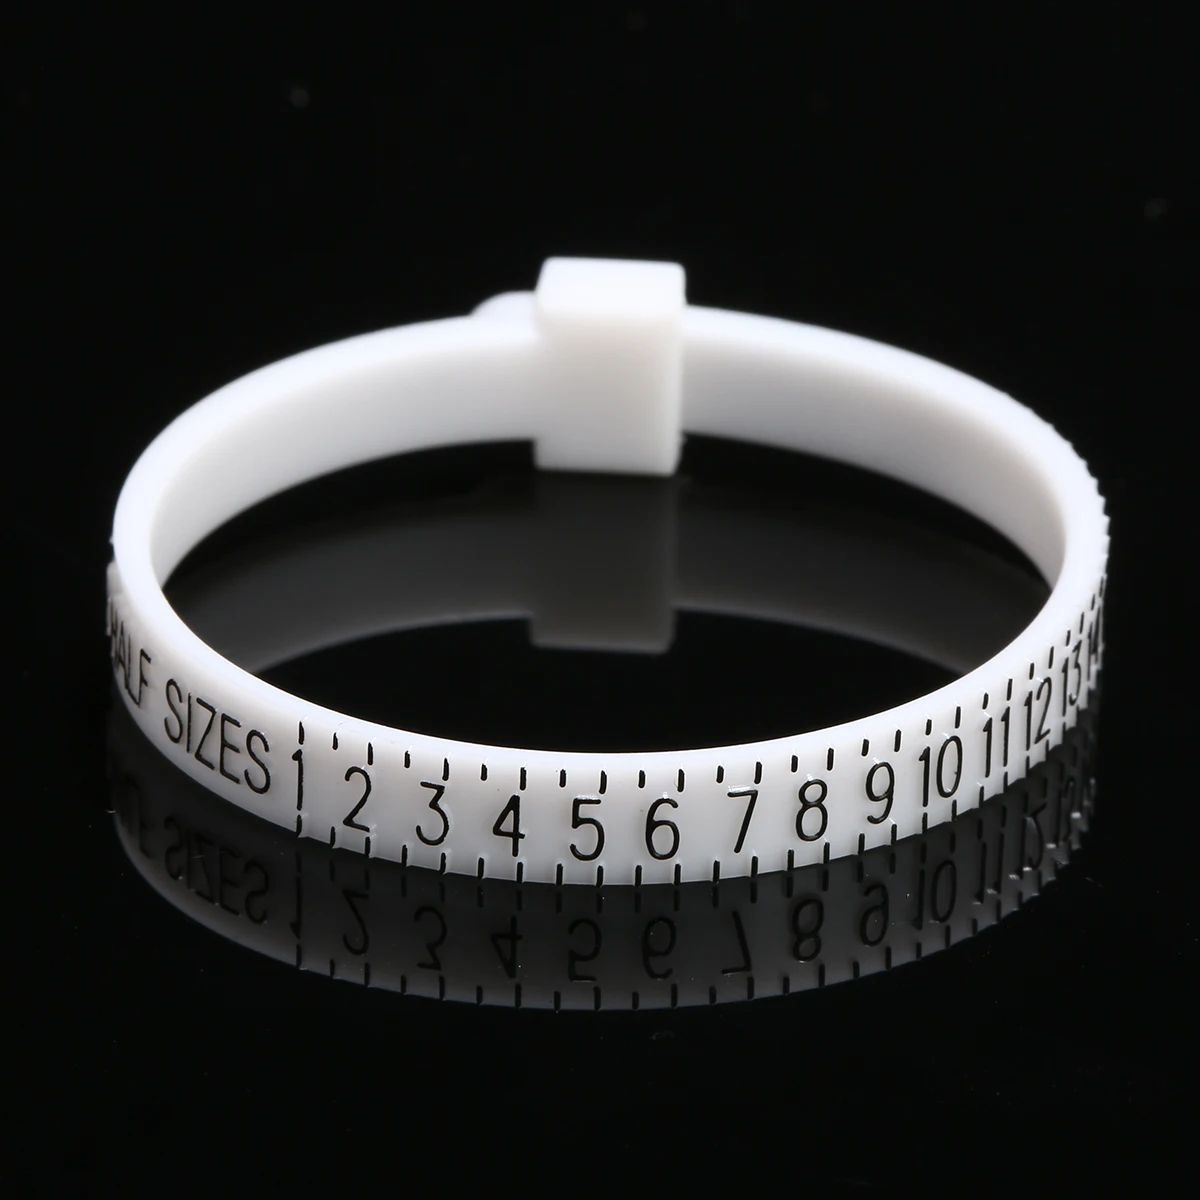 High Quality US Ring Sizer Measure Finger Gauge For Wedding Ring Band Women Men Standard Tester Jewelry Tool Shellhard